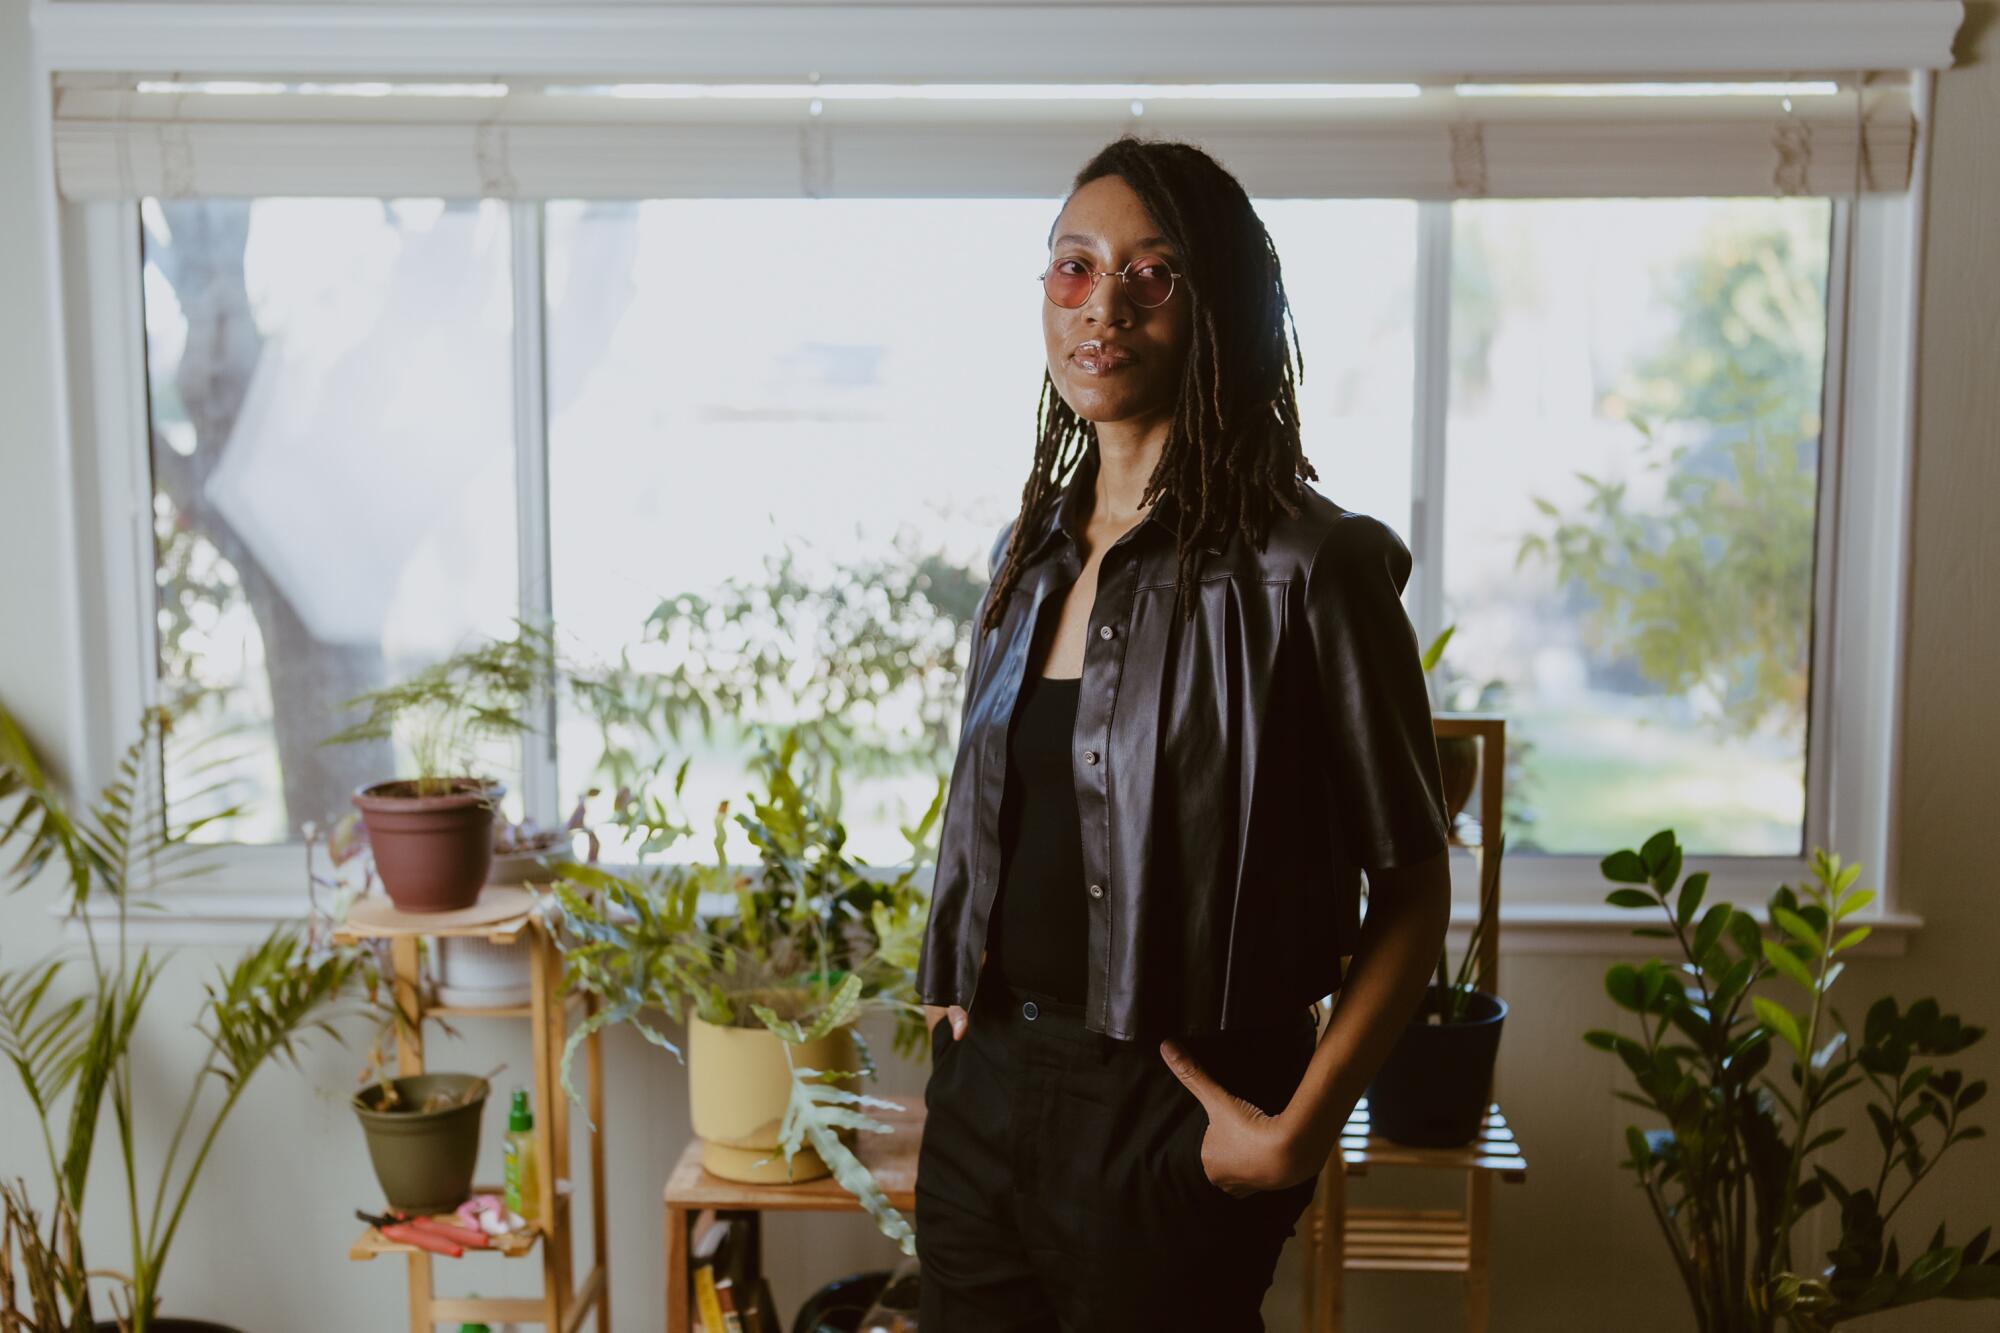 Venita Blackburn, a Black woman with locs and rose-colroed glasses stands before window and shelf full of plants.